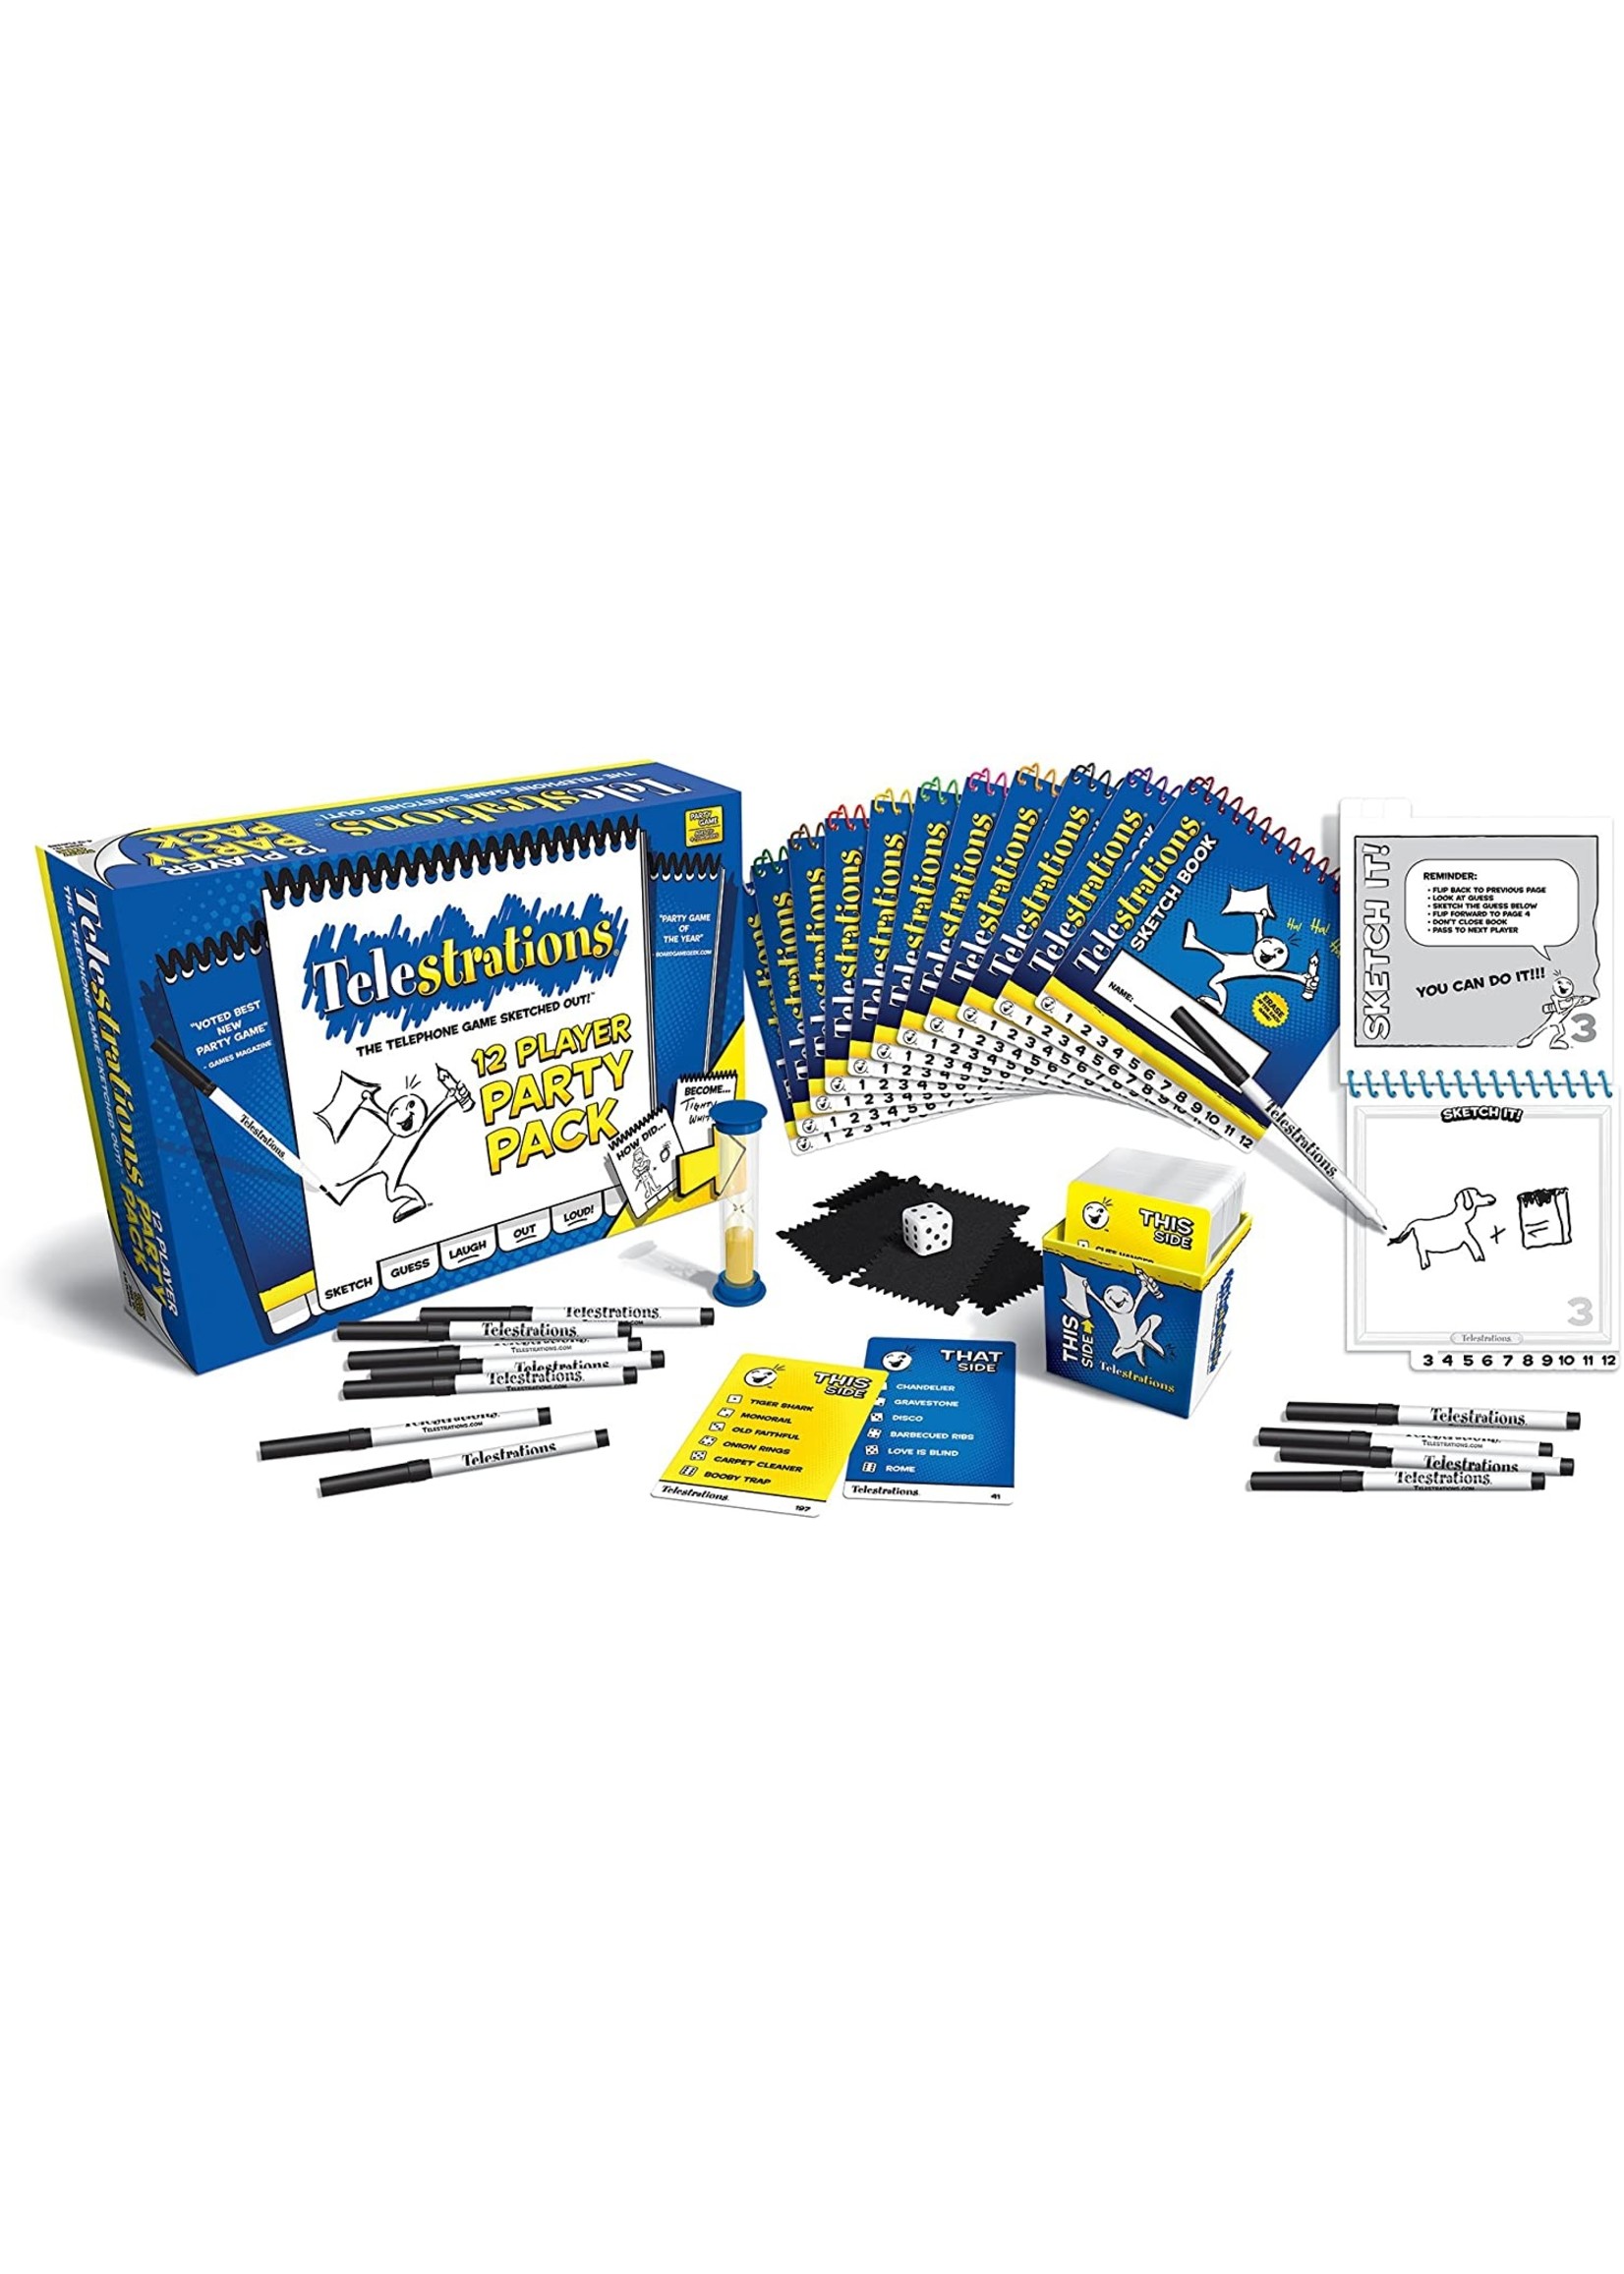 USAopoly Telestrations - 12 Player Party Pack